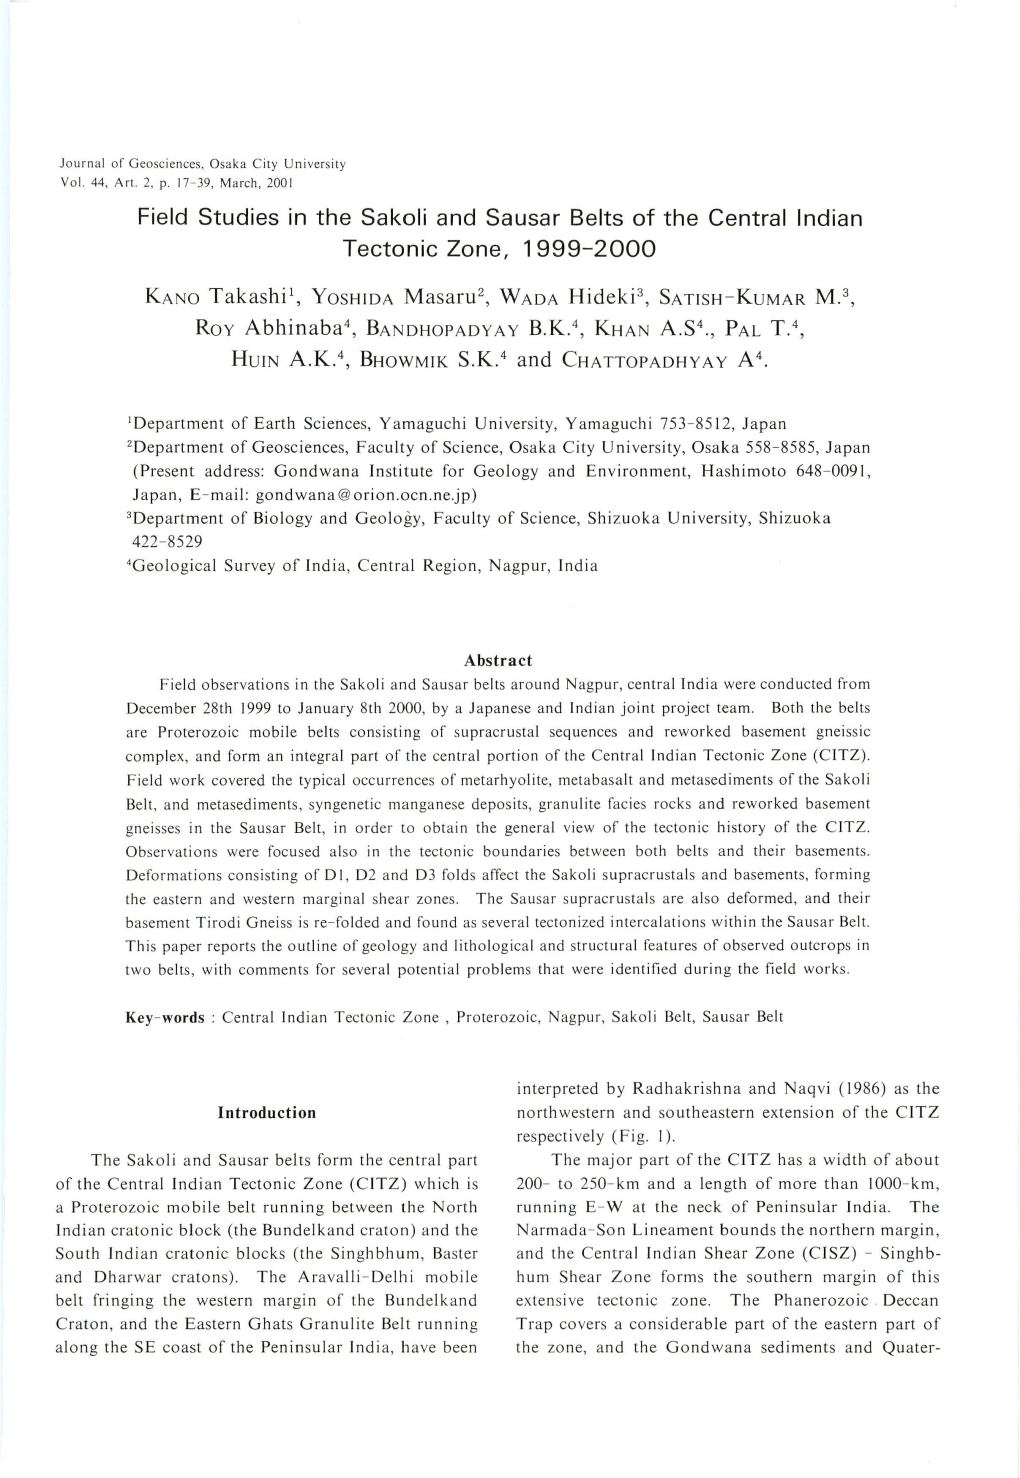 Field Studies in the Sakoli and Sausar Belts of the Central Indian Tectonic Zone, 1999-2000